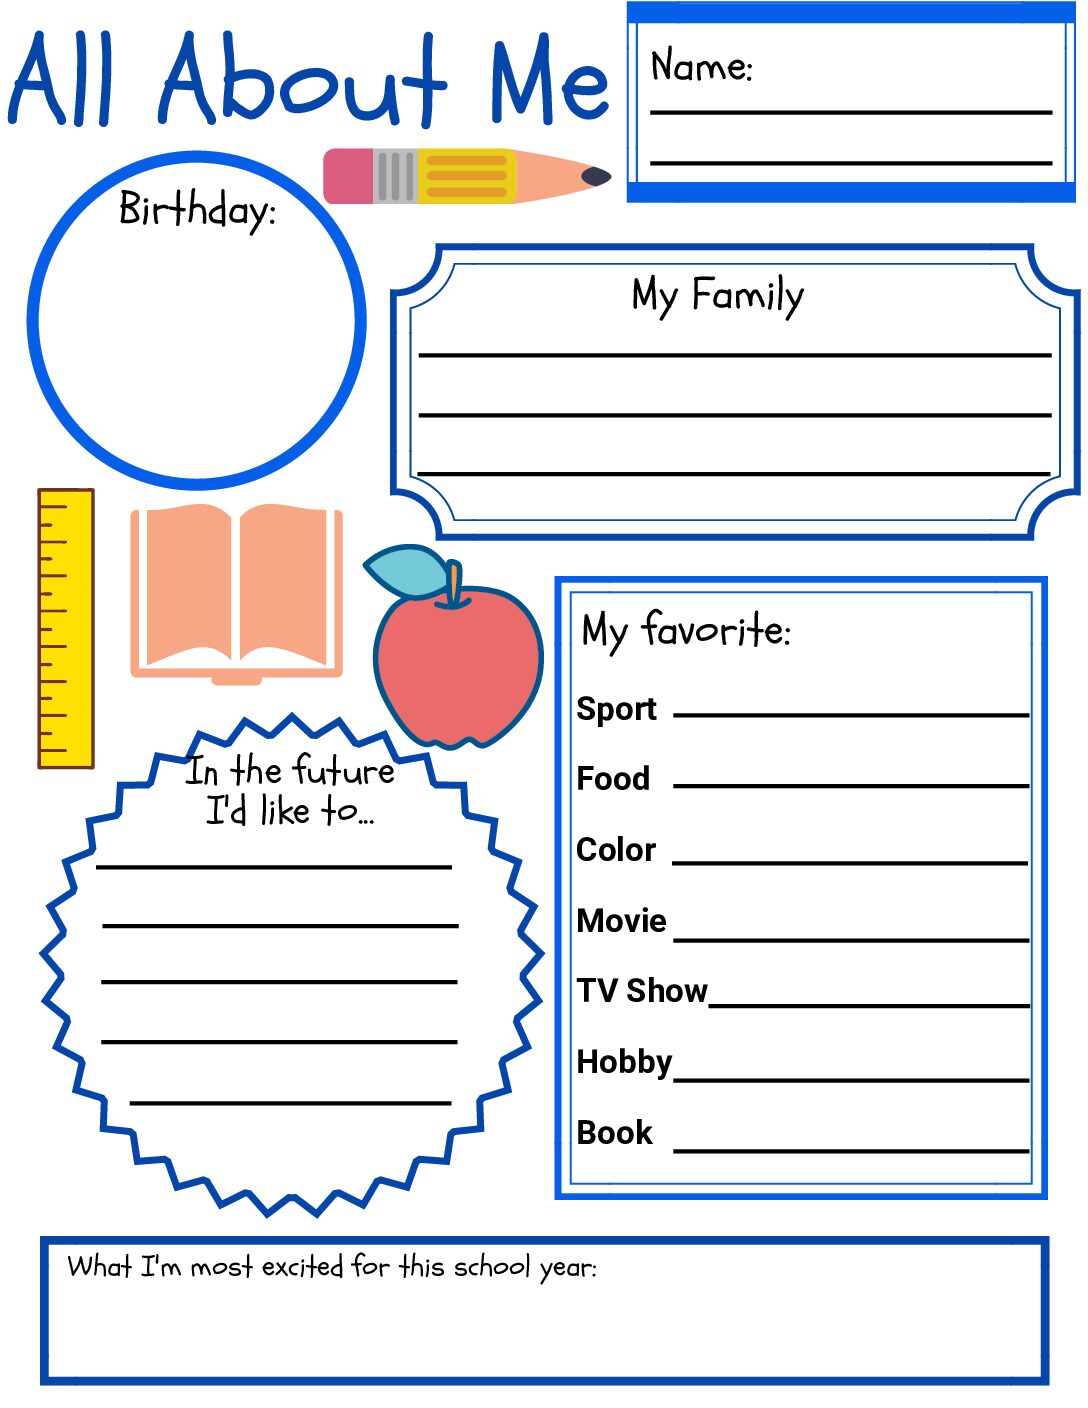 English EFL Worksheet - All About Me - Language Advisor Pertaining To All About Me Printable Worksheet